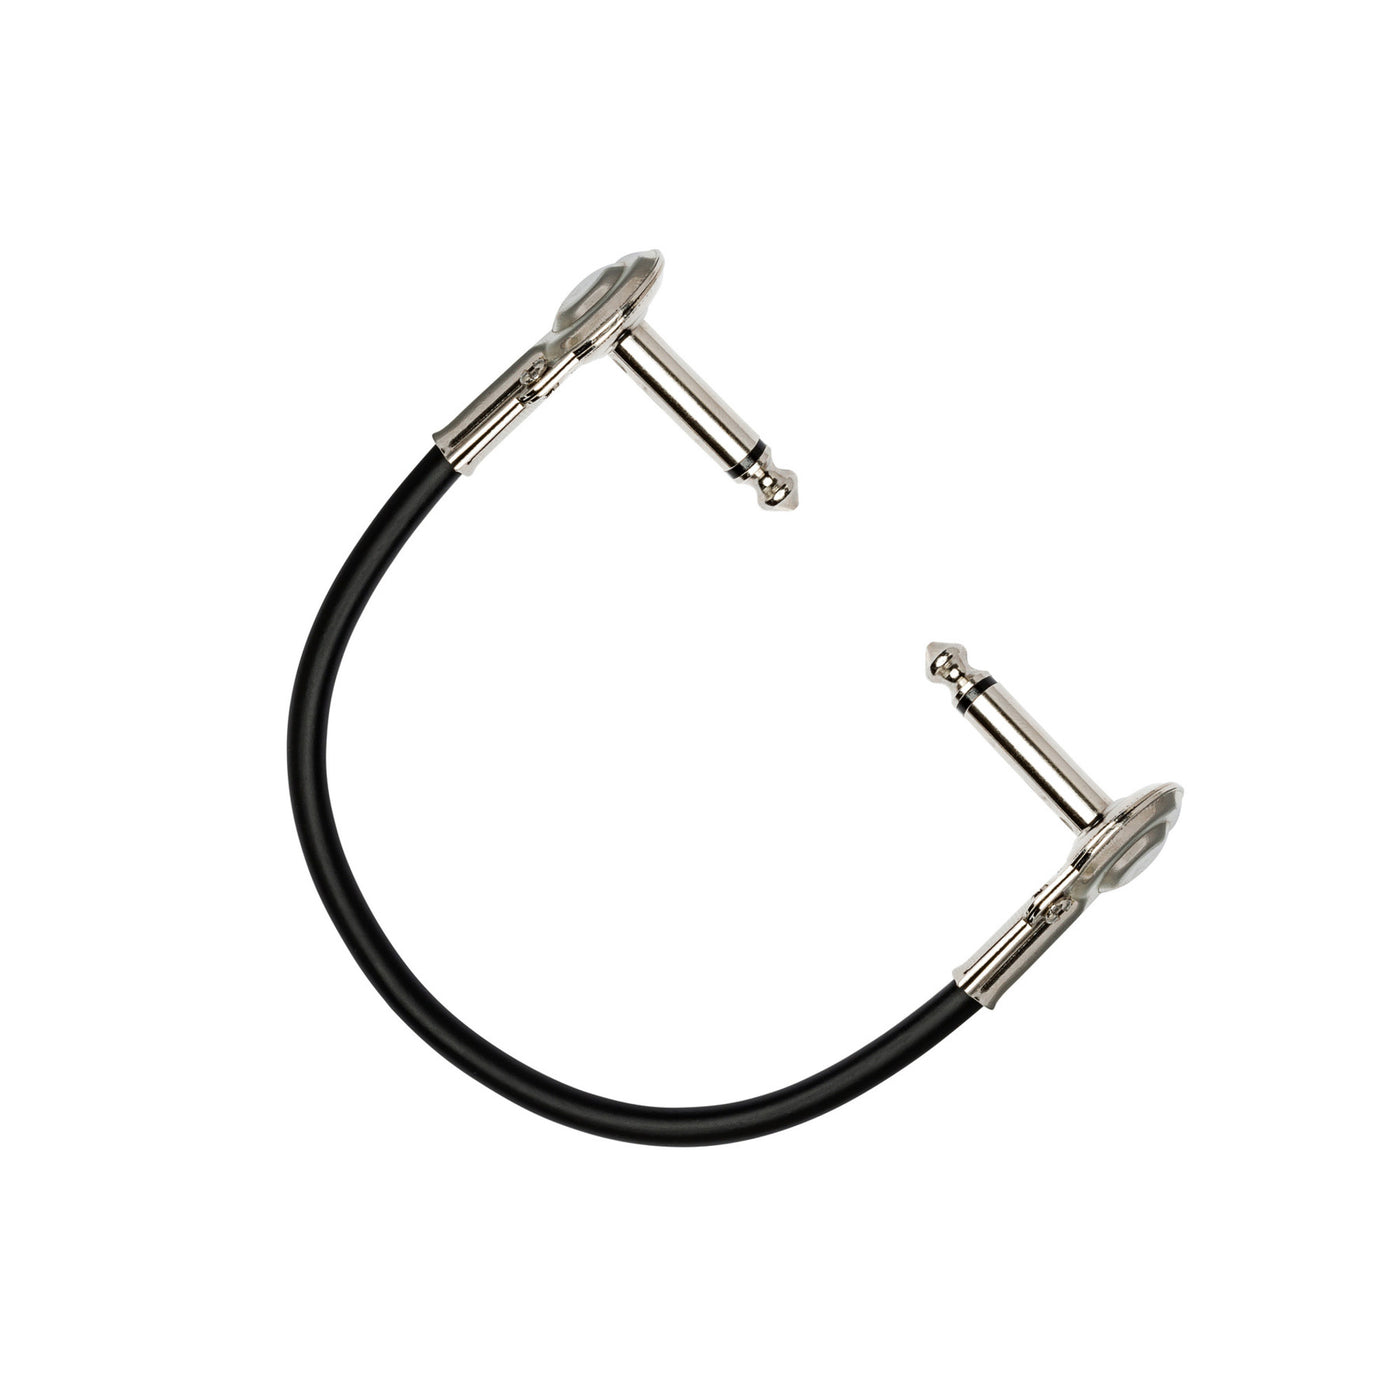 Hosa Low-profile Right Angle to Right Angle Guitar Patch Cable, 6-Inch (IRG-100.5)